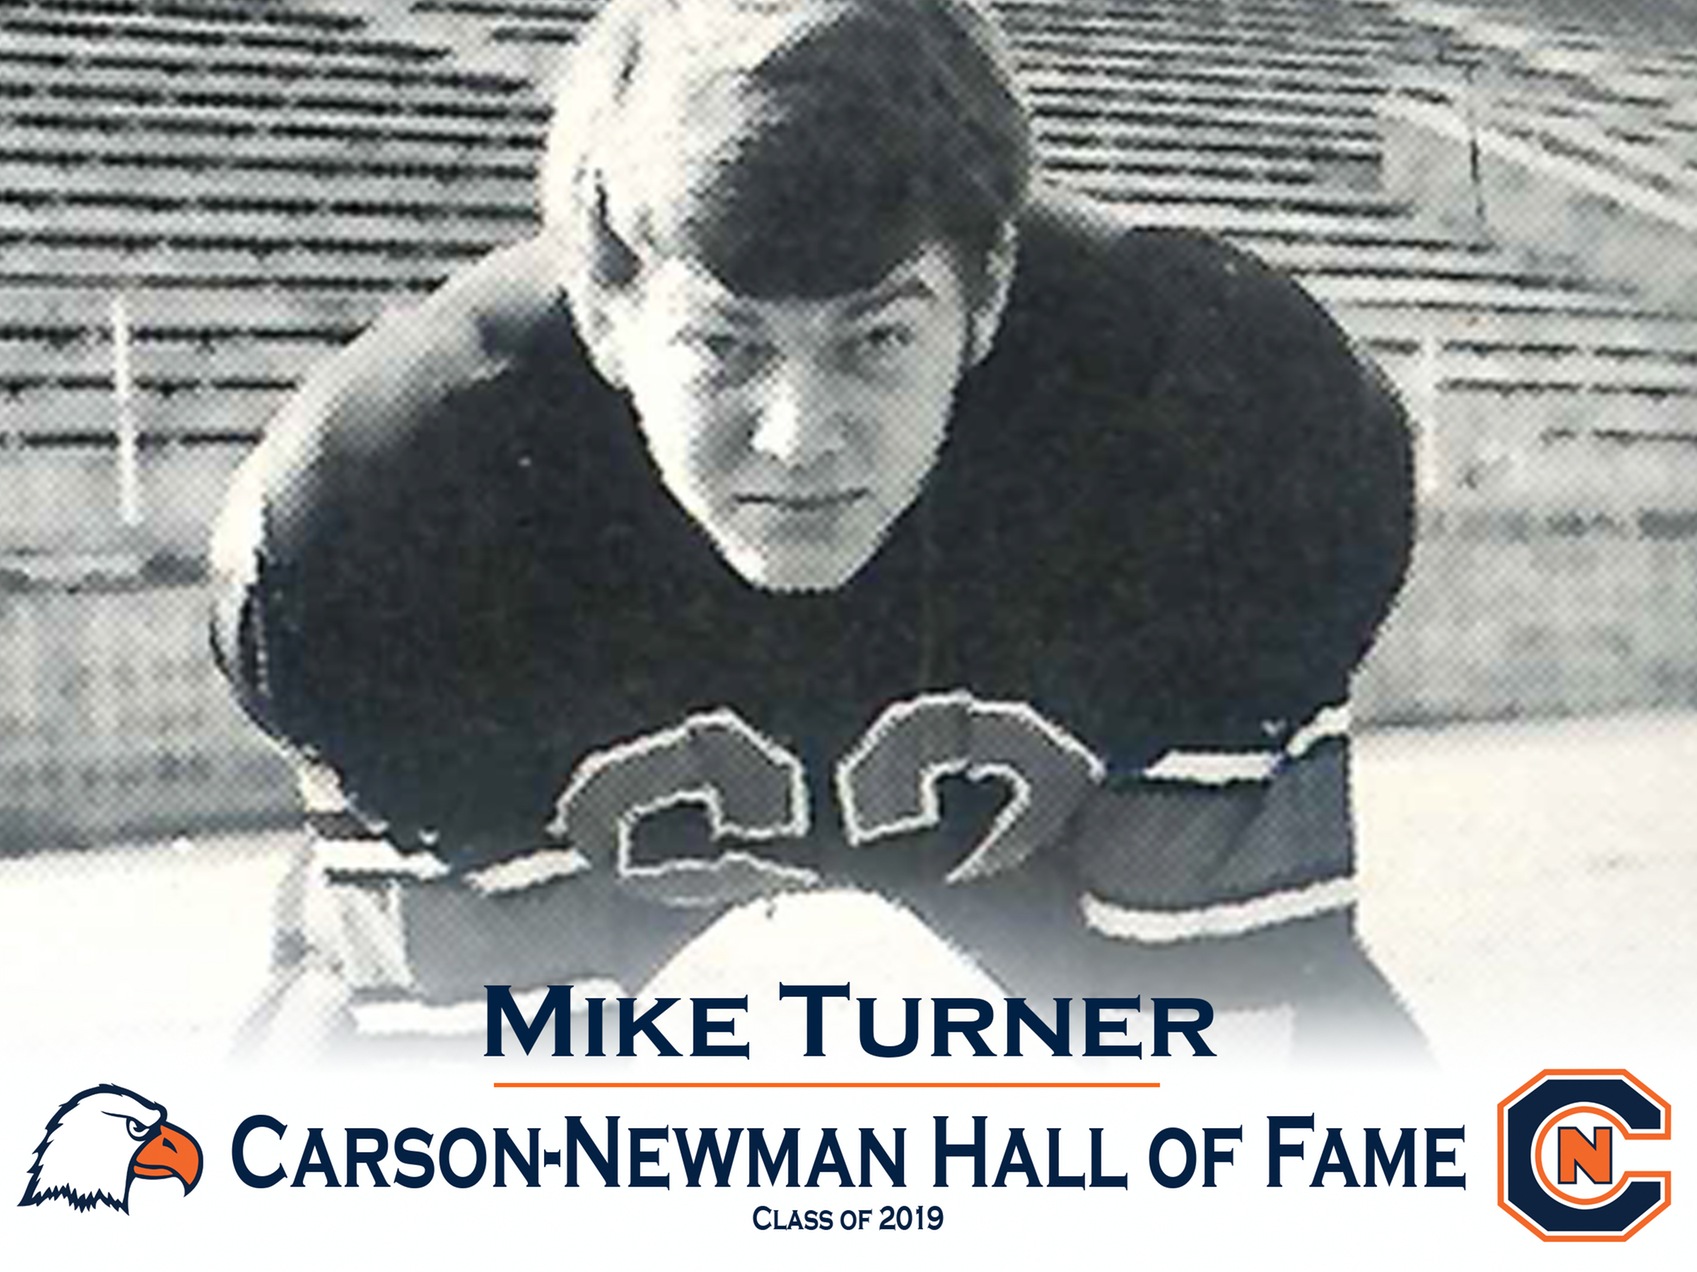 Six headed into Carson-Newman Athletics Hall of Fame Saturday